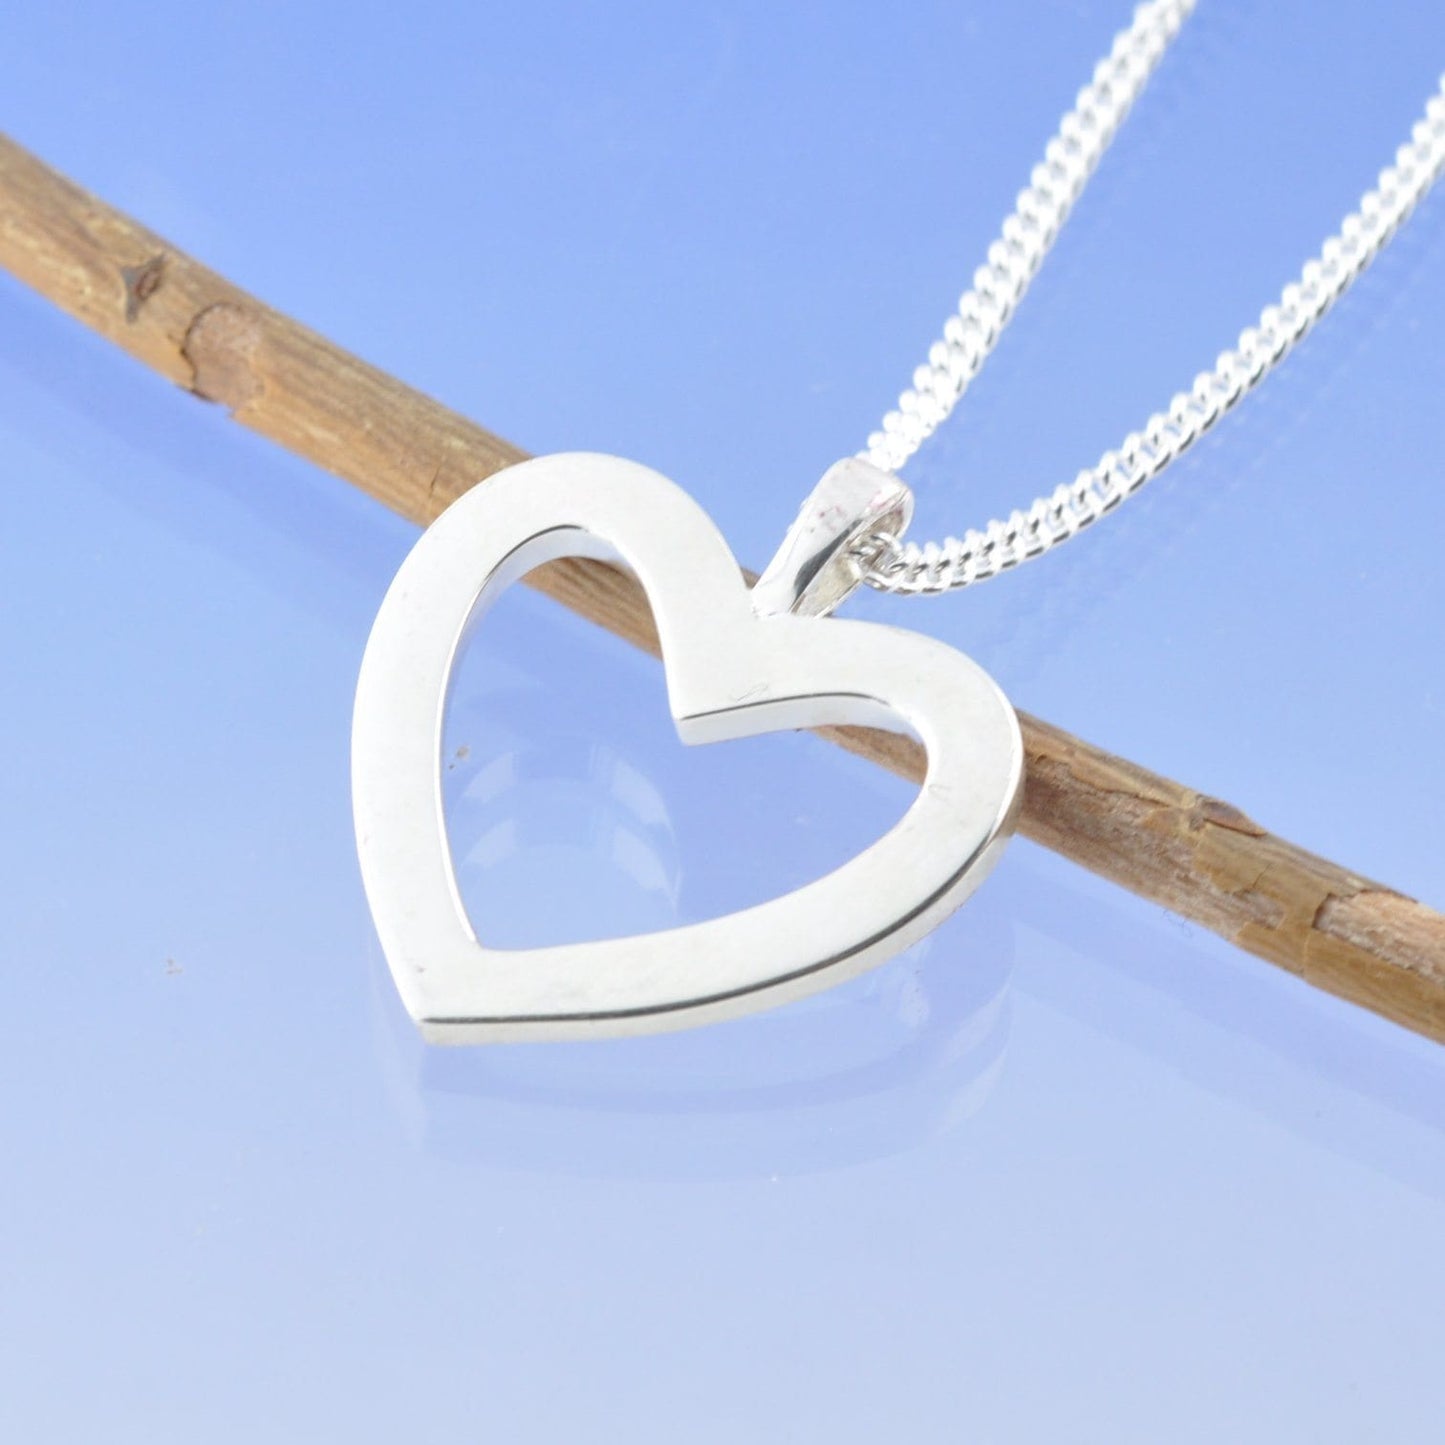 Cremation Ash Necklace - Halo Heart Pendant by Chris Parry Jewellery